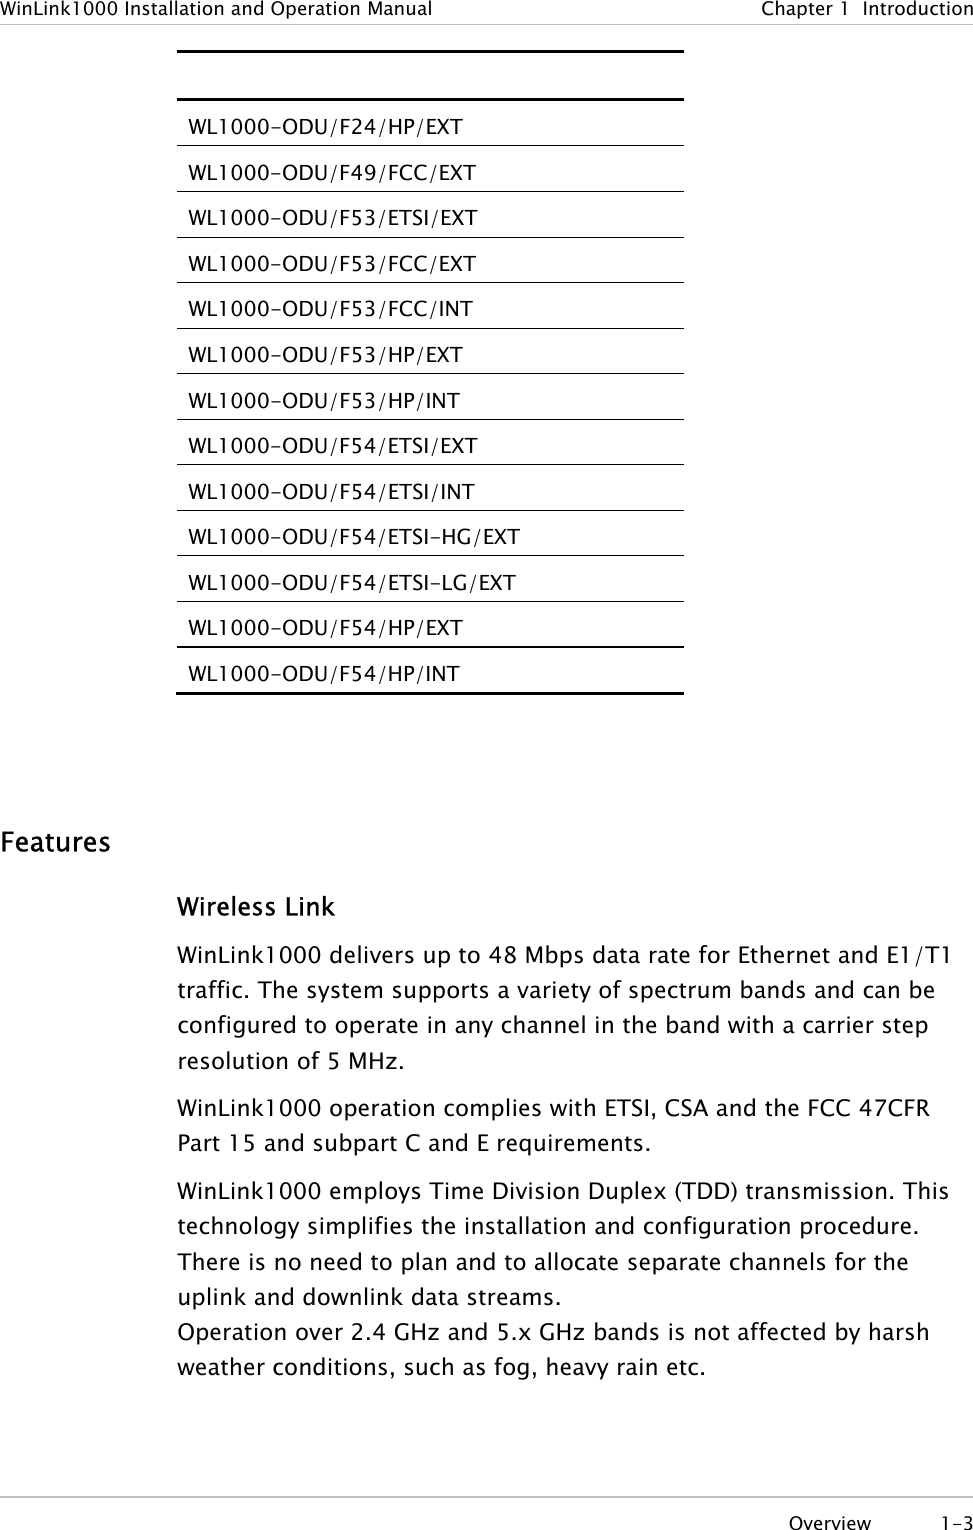 WinLink1000 Installation and Operation Manual  Chapter 1  Introduction  WL1000-ODU/F24/HP/EXT WL1000-ODU/F49/FCC/EXT WL1000-ODU/F53/ETSI/EXT WL1000-ODU/F53/FCC/EXT WL1000-ODU/F53/FCC/INT WL1000-ODU/F53/HP/EXT WL1000-ODU/F53/HP/INT WL1000-ODU/F54/ETSI/EXT WL1000-ODU/F54/ETSI/INT WL1000-ODU/F54/ETSI-HG/EXT WL1000-ODU/F54/ETSI-LG/EXT WL1000-ODU/F54/HP/EXT WL1000-ODU/F54/HP/INT   Features Wireless Link WinLink1000 delivers up to 48 Mbps data rate for Ethernet and E1/T1 traffic. The system supports a variety of spectrum bands and can be configured to operate in any channel in the band with a carrier step resolution of 5 MHz. WinLink1000 operation complies with ETSI, CSA and the FCC 47CFR Part 15 and subpart C and E requirements. WinLink1000 employs Time Division Duplex (TDD) transmission. This technology simplifies the installation and configuration procedure. There is no need to plan and to allocate separate channels for the uplink and downlink data streams.  Operation over 2.4 GHz and 5.x GHz bands is not affected by harsh weather conditions, such as fog, heavy rain etc.  Overview 1-3 